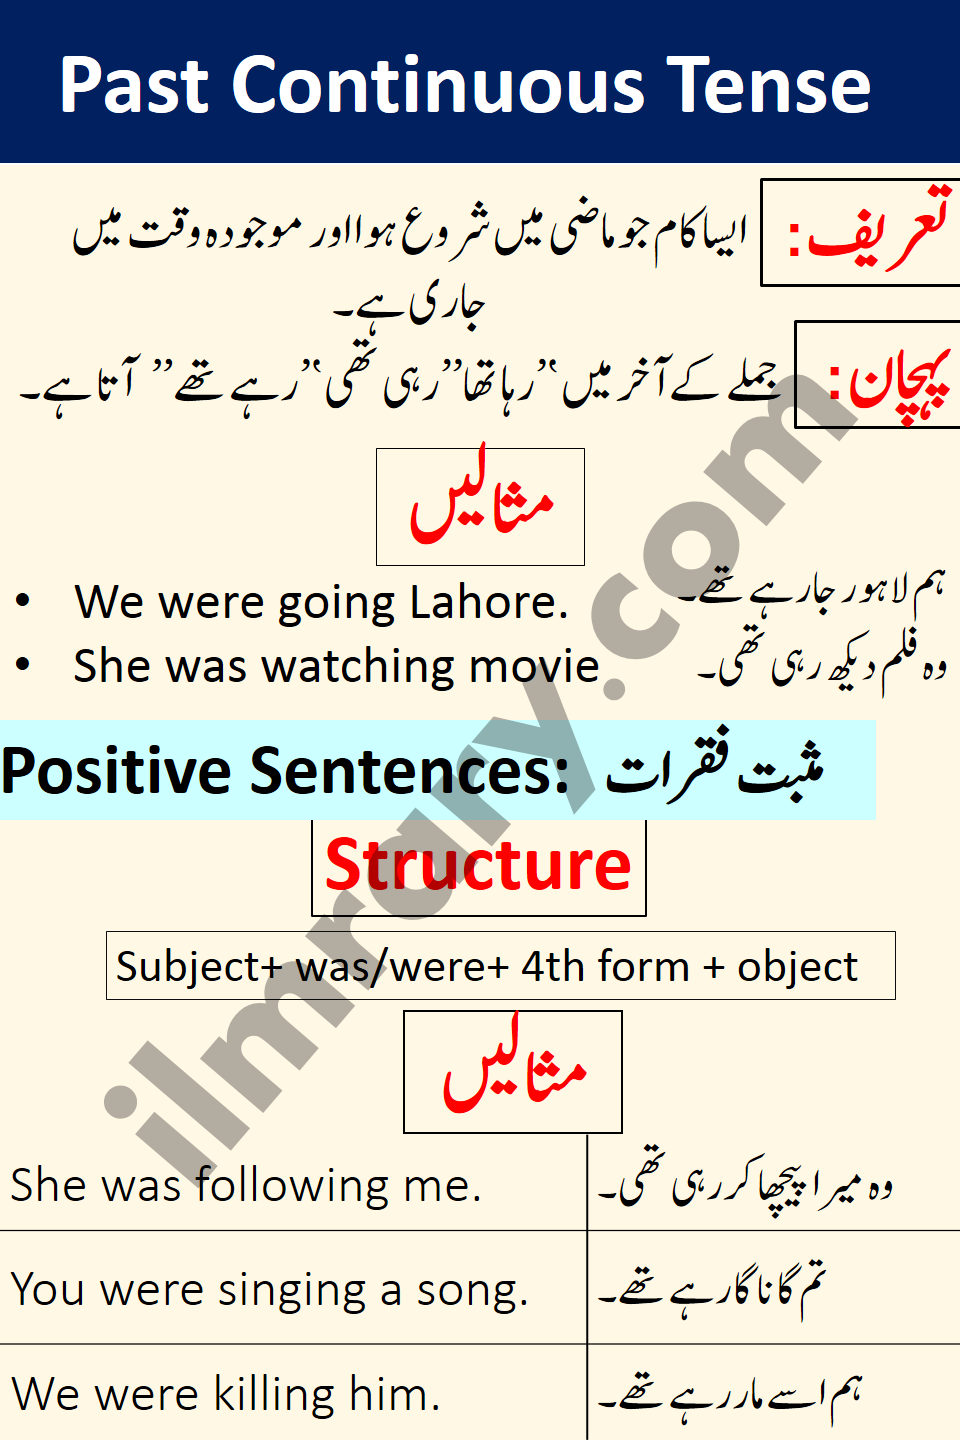 Positive Examples for Past Continuous Tense in Urdu